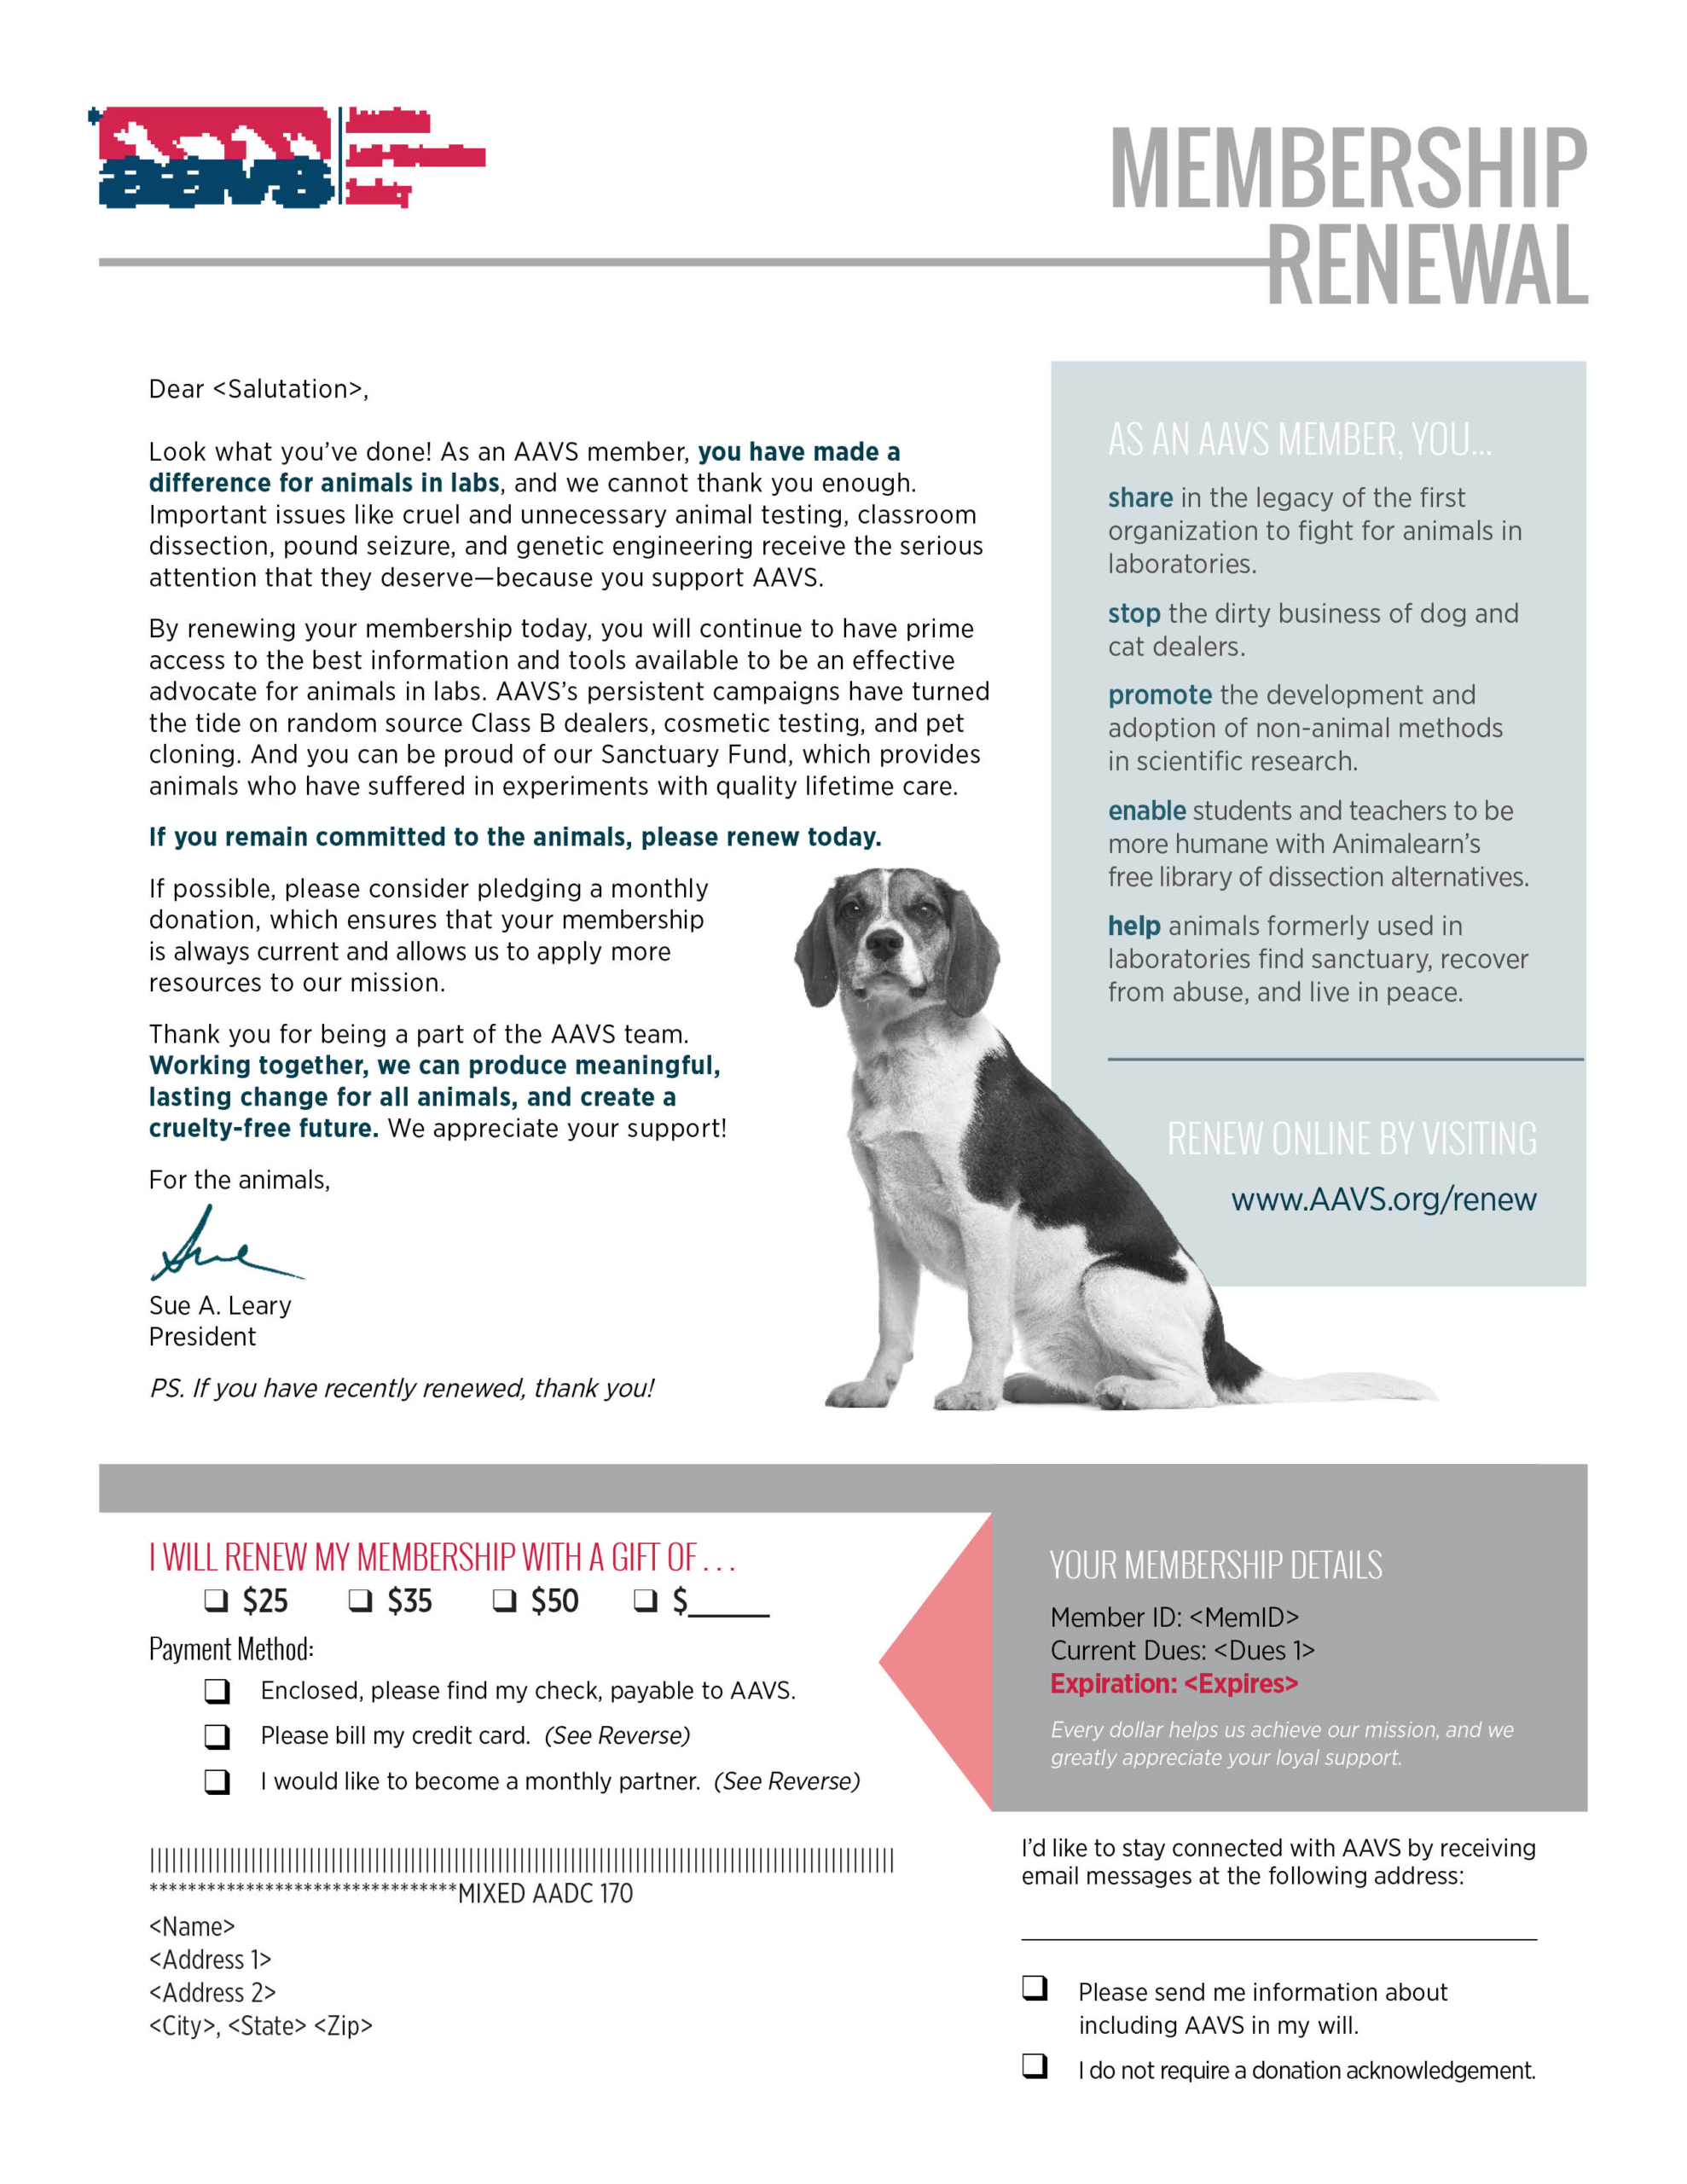 AAVS - Membership Renewal Mailing - First Notice - Letter Front